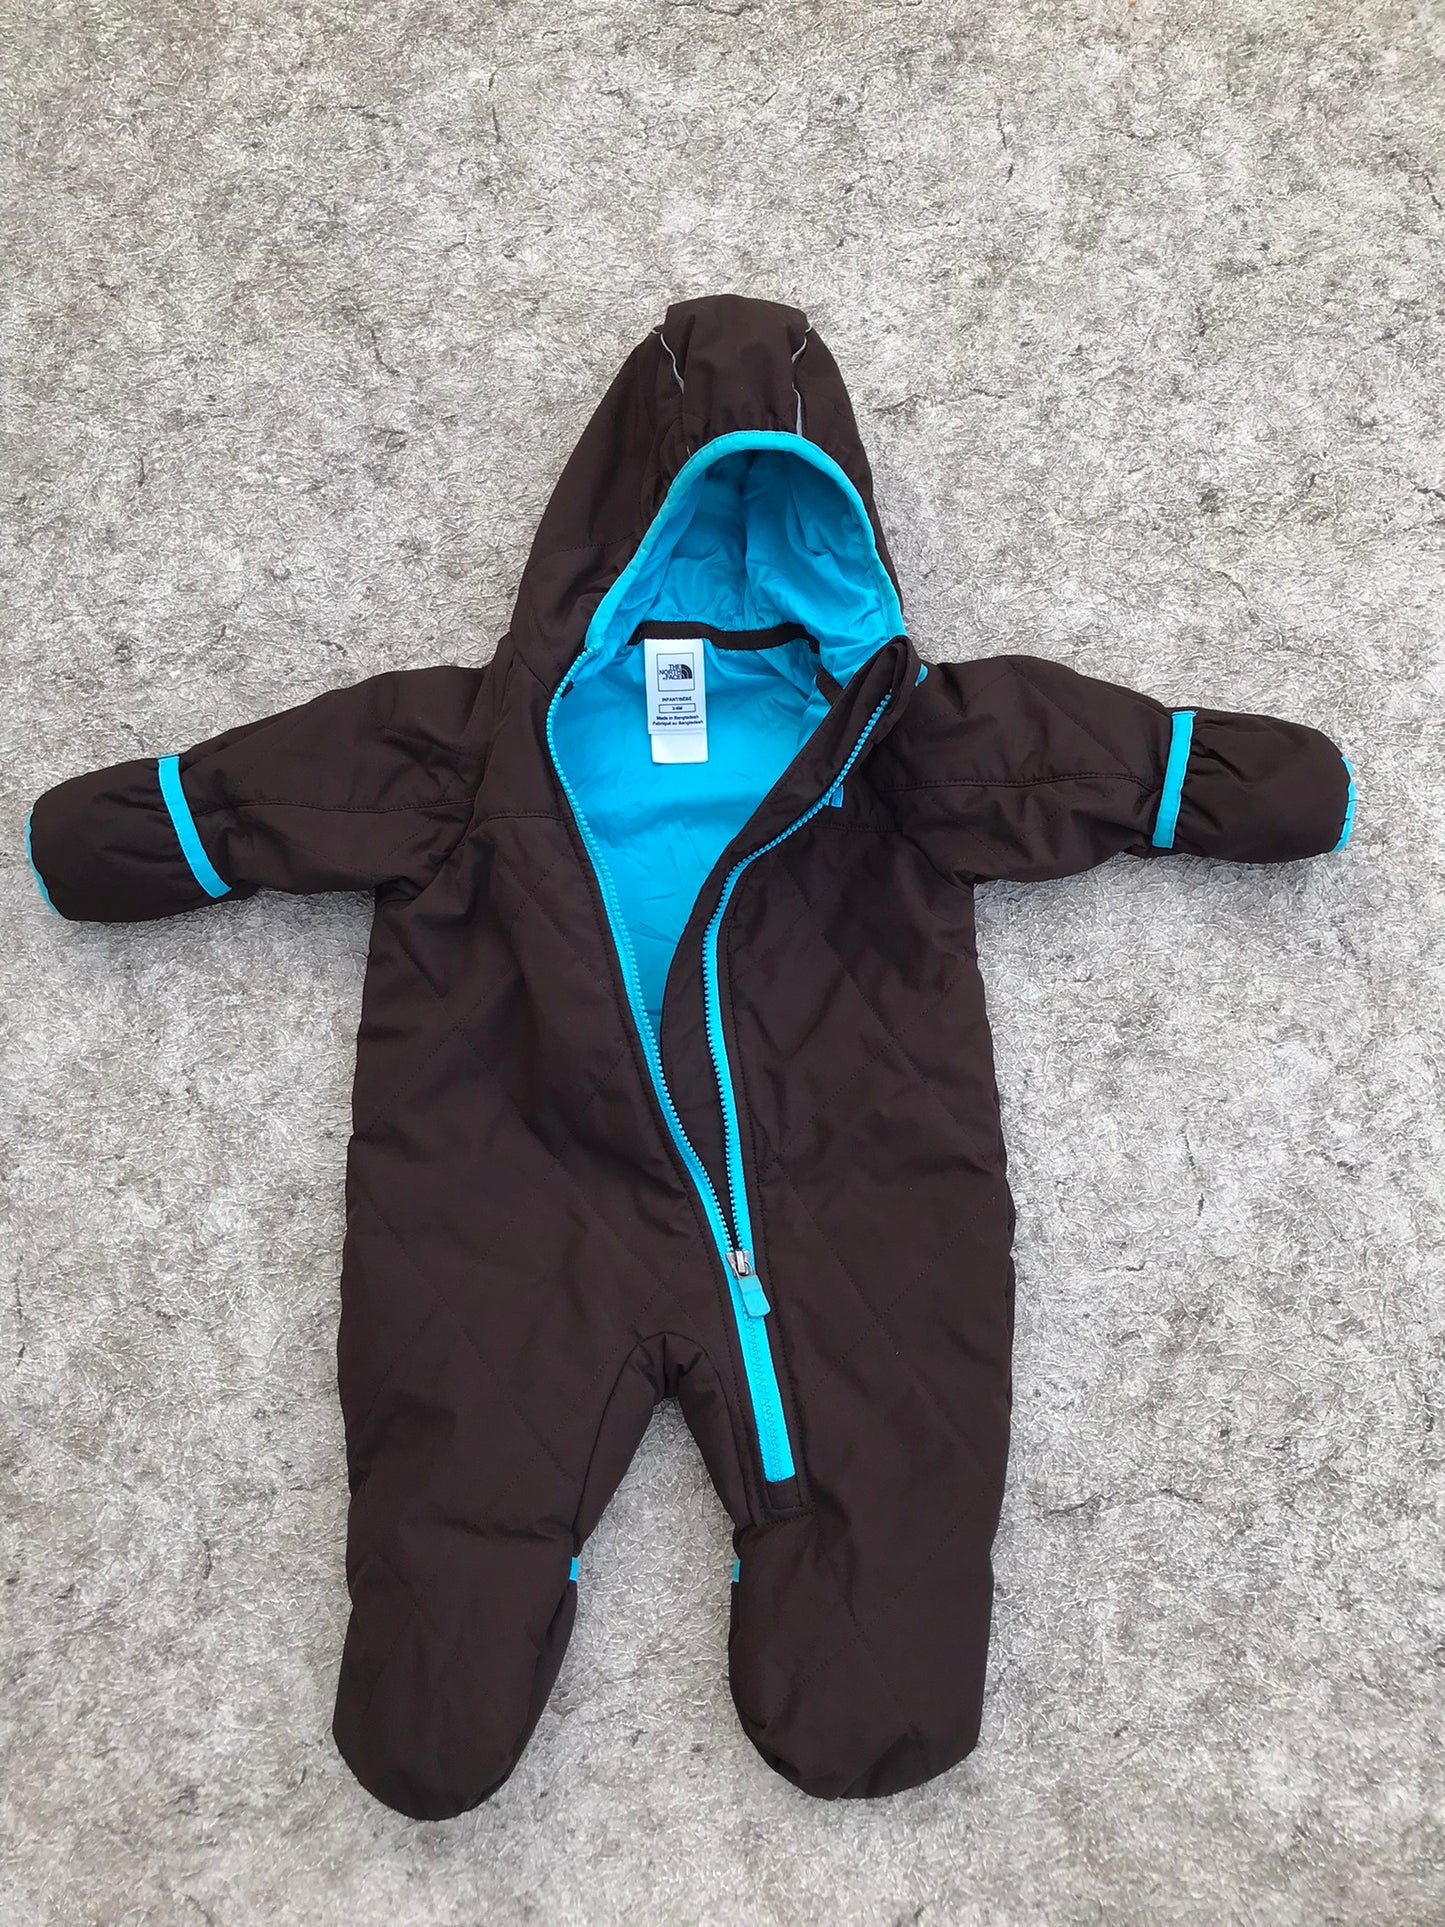 Snowsuit Child Size 3-6 Infant Baby The North Face Brown Blue Hand Mitts Open or Covered